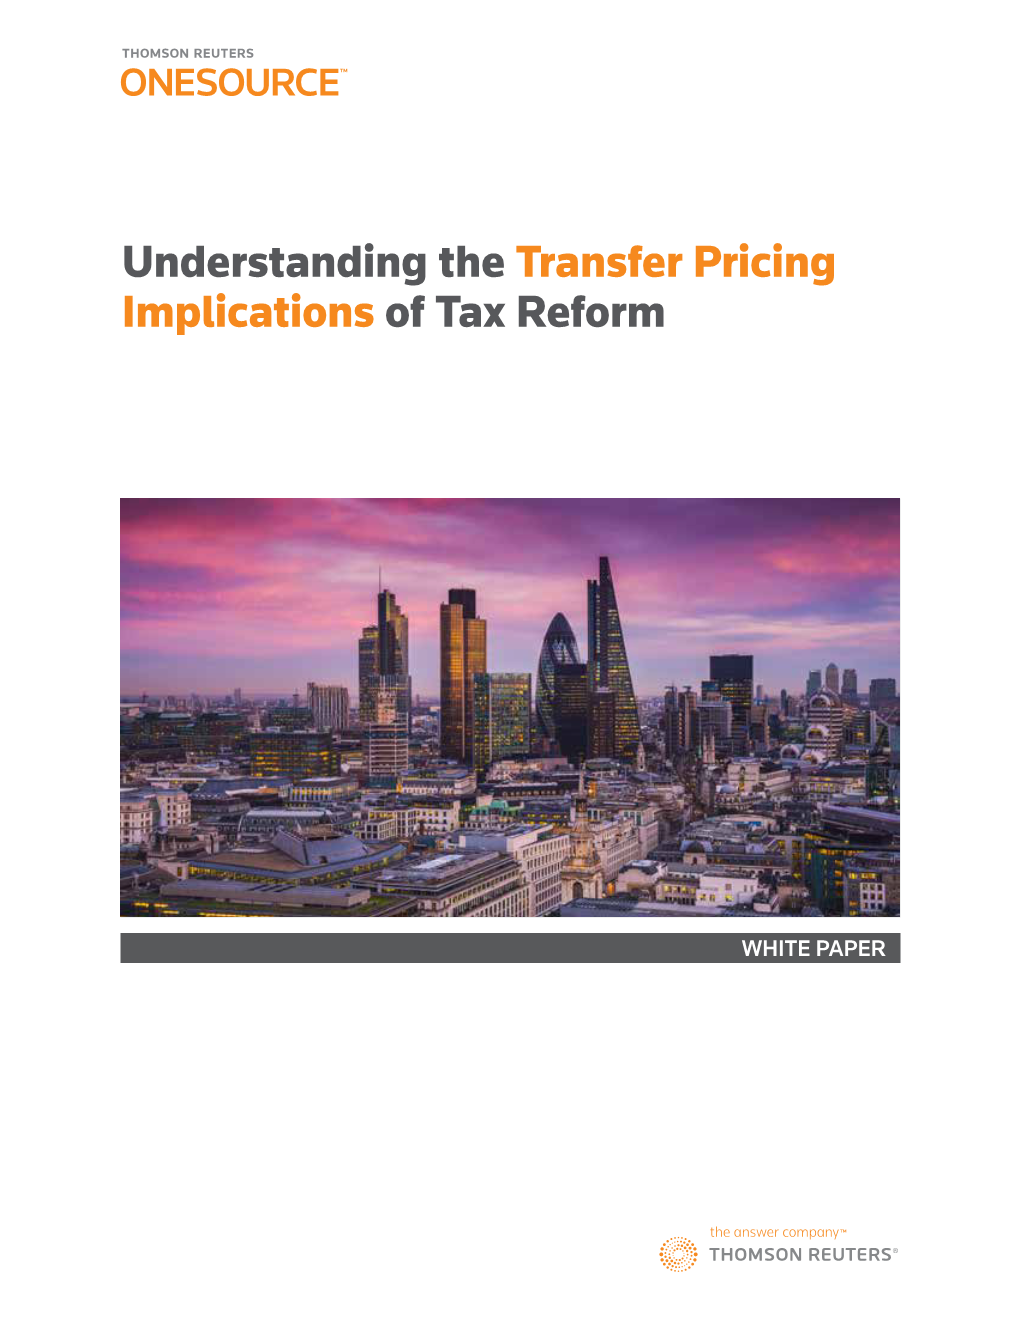 Understanding the Transfer Pricing Implications of Tax Reform